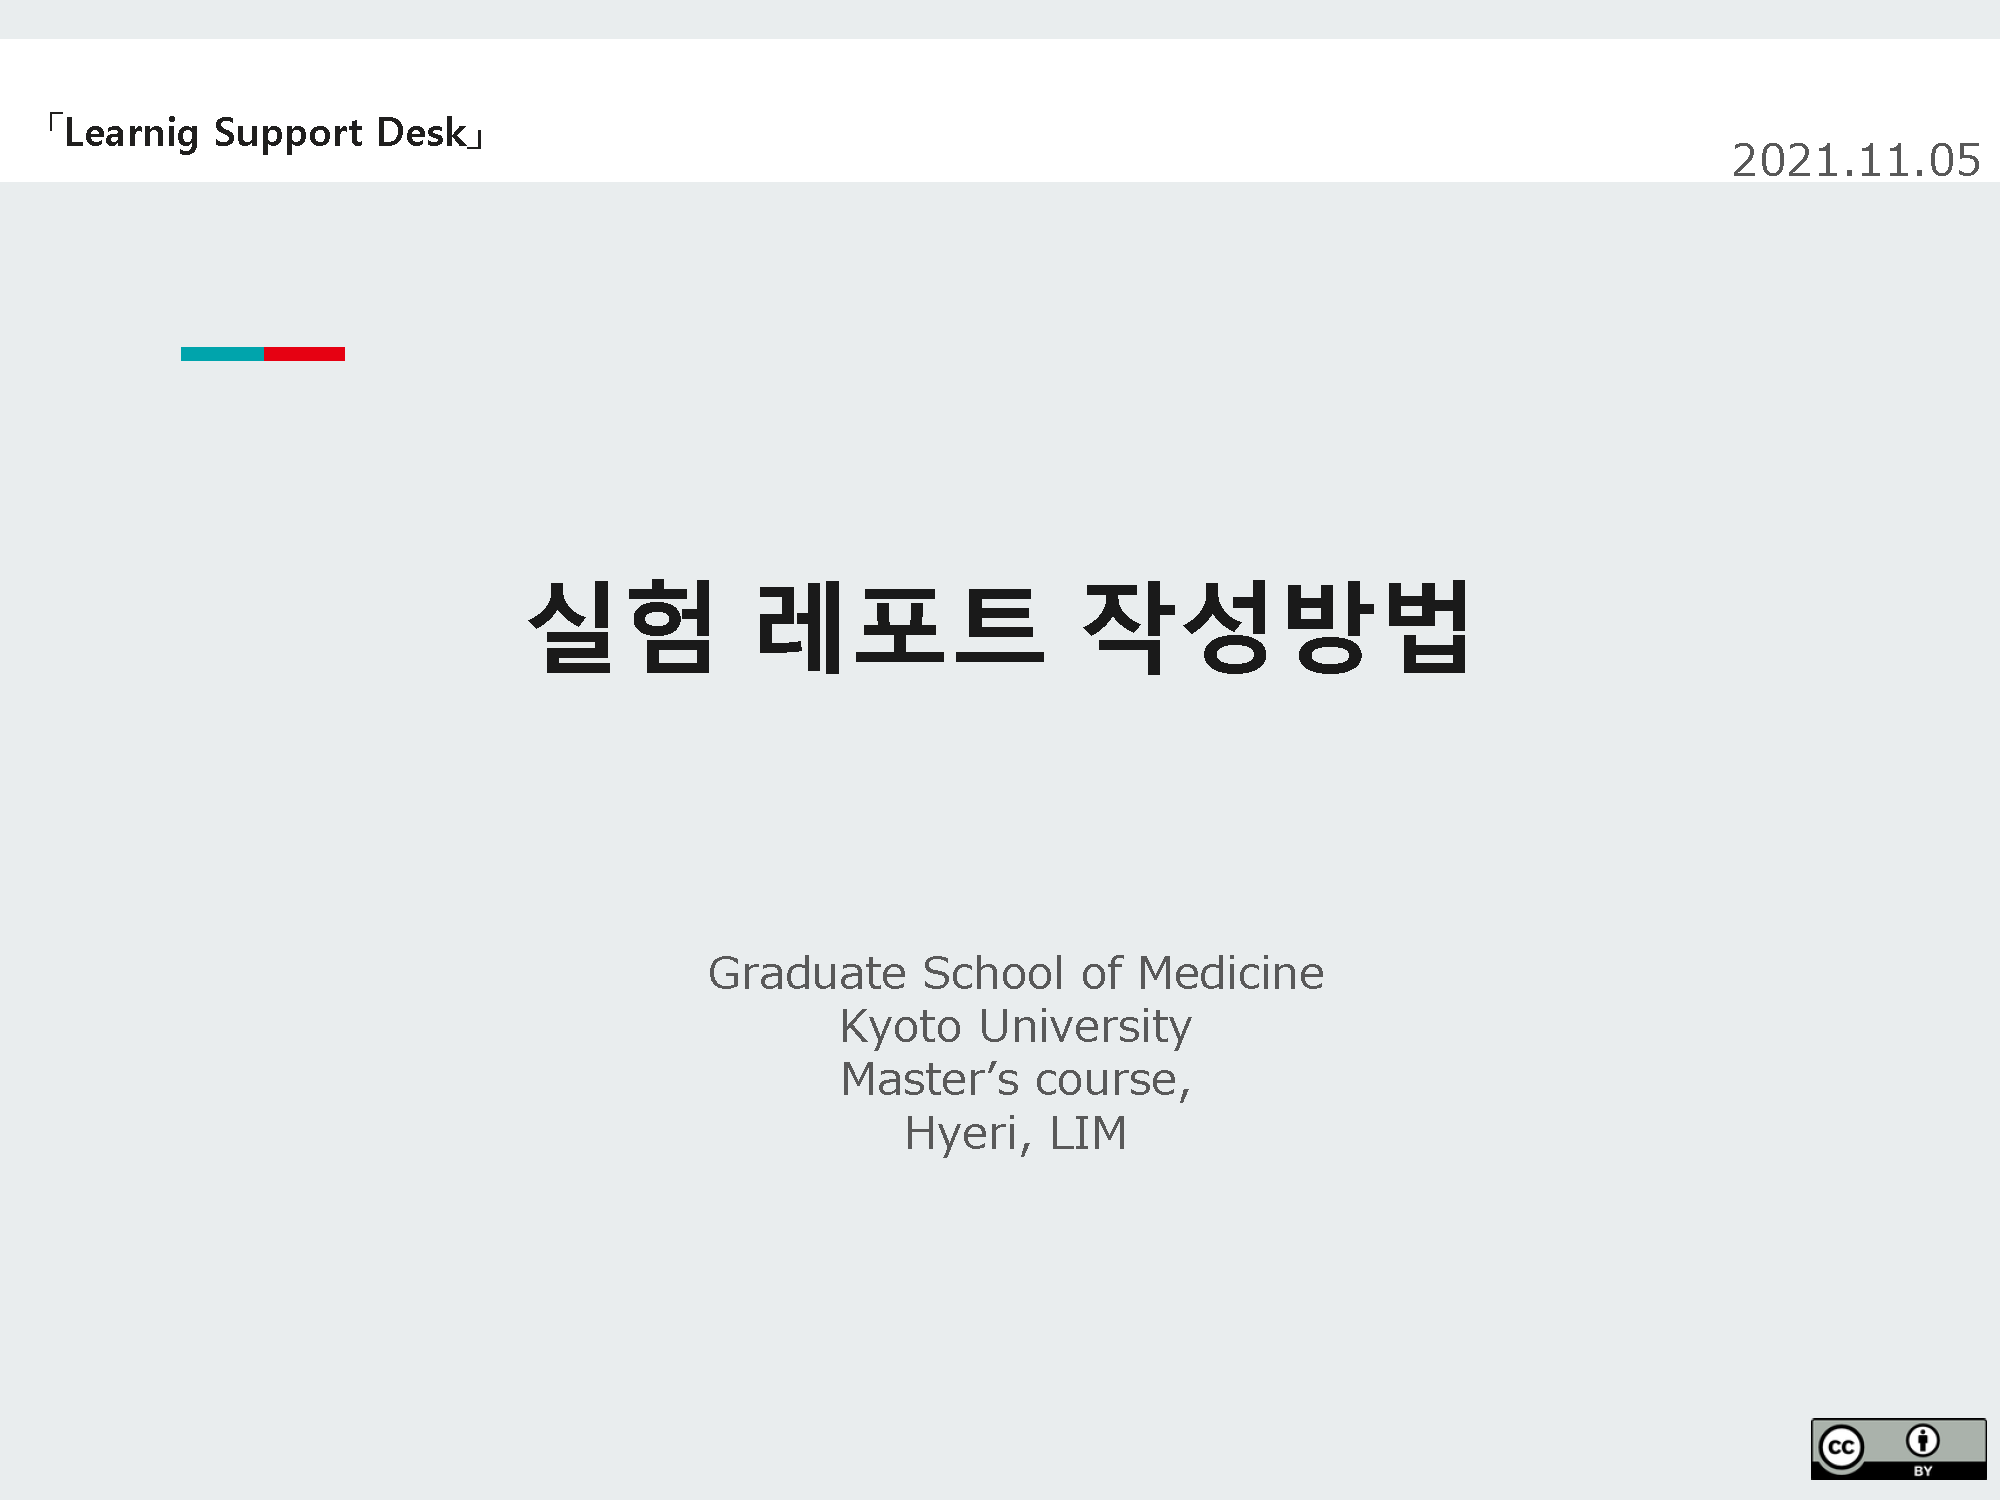 PDF　실험 레포트 작성 방법　（you can read this at library page on cyber learning space）